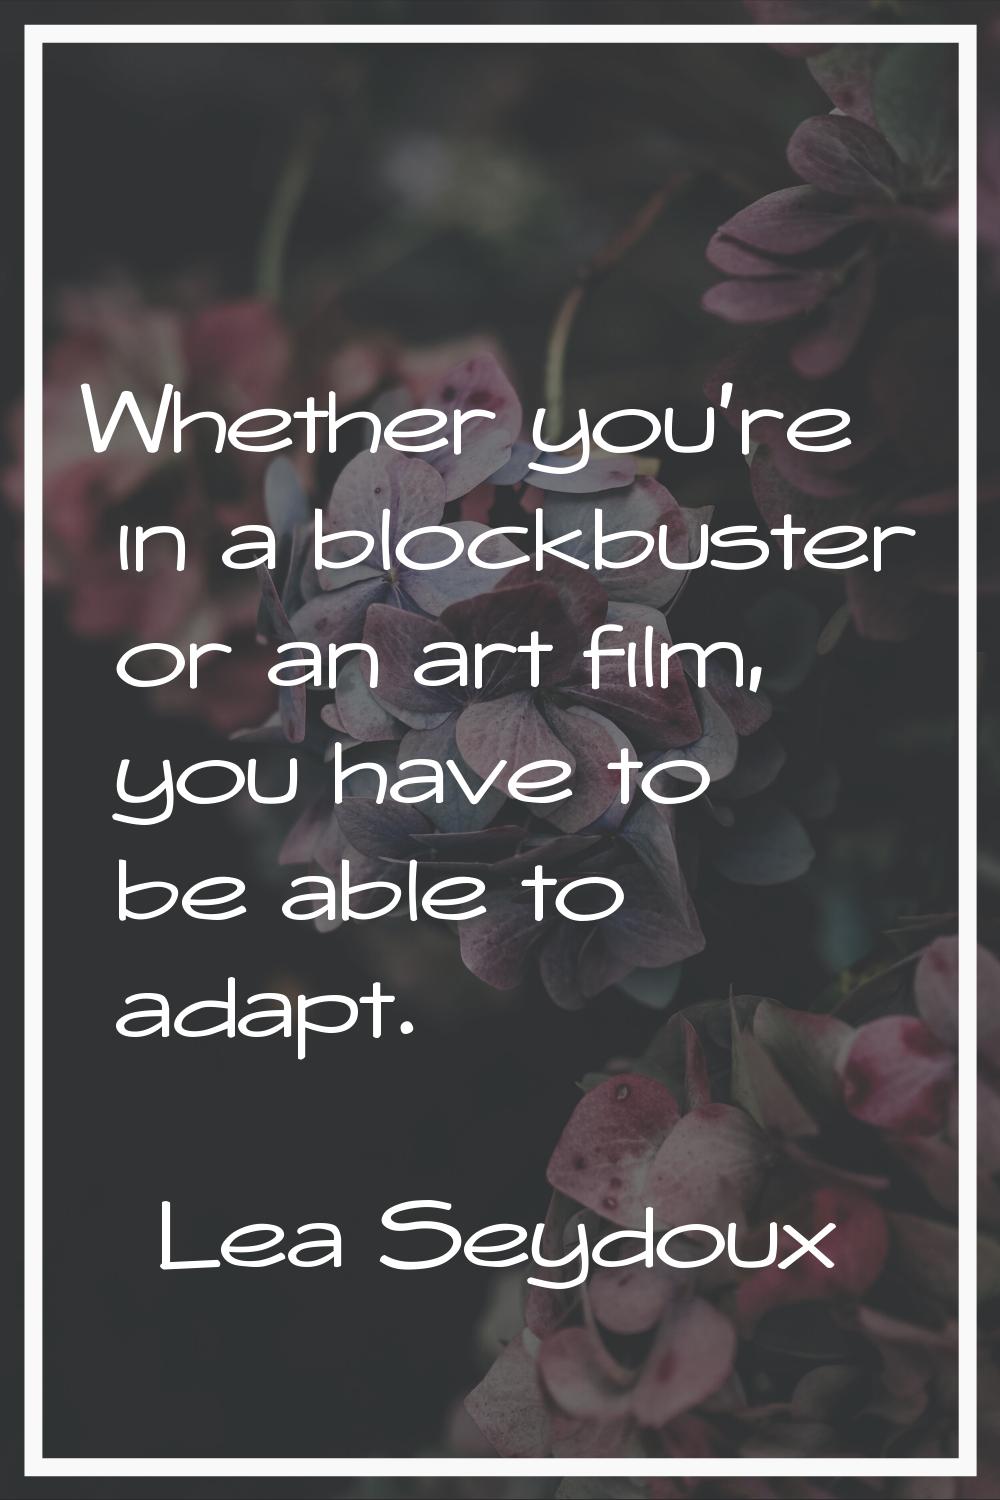 Whether you're in a blockbuster or an art film, you have to be able to adapt.